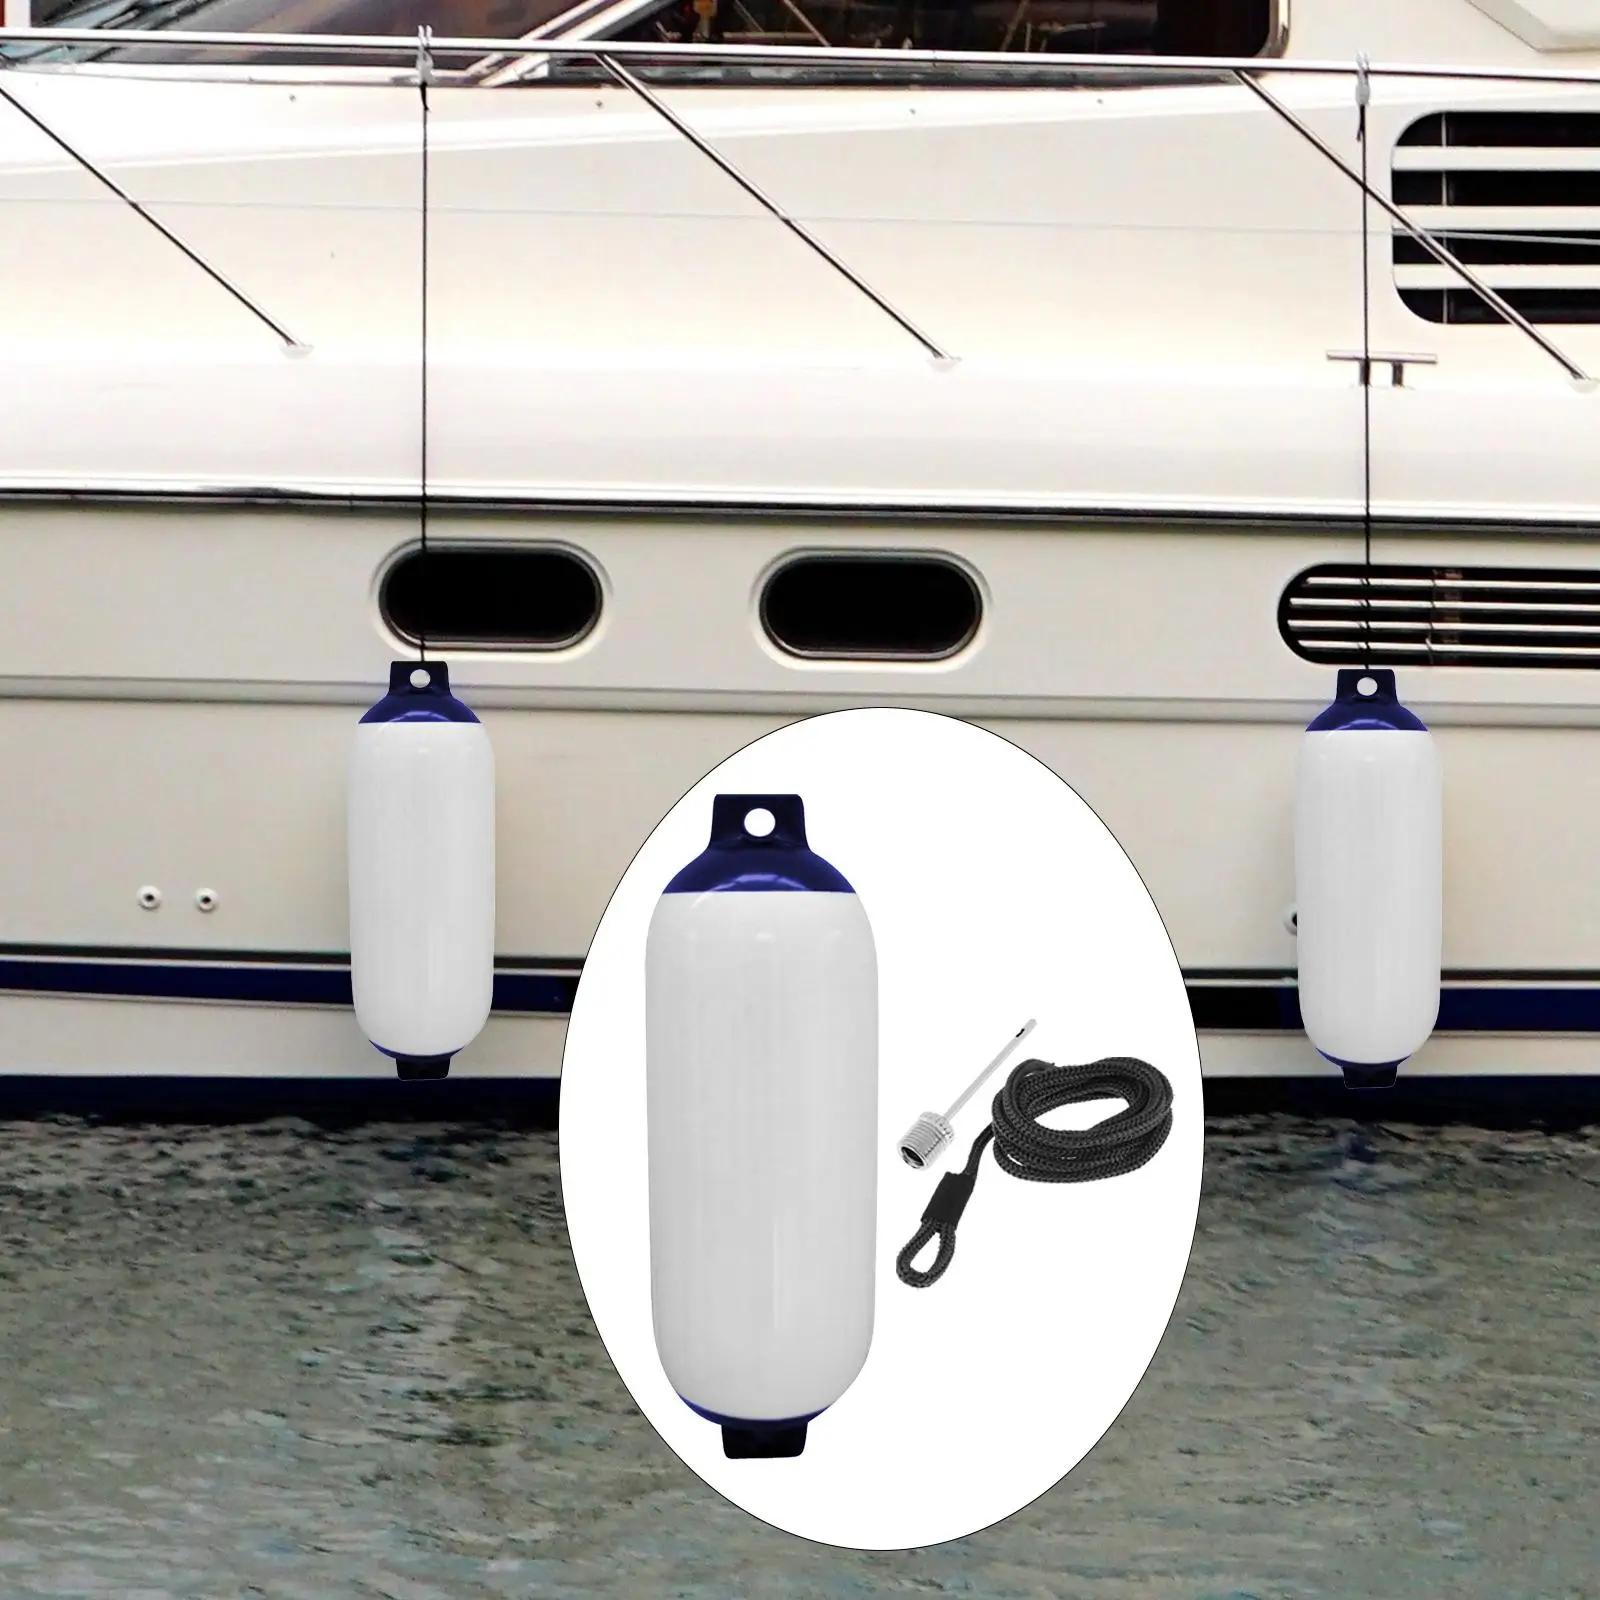 Boat Fender Boat Accessories Yacht Fenders Bumpers Marine Boat Fender for Sport Boats Bass Boats Docking Mooring Cushioning